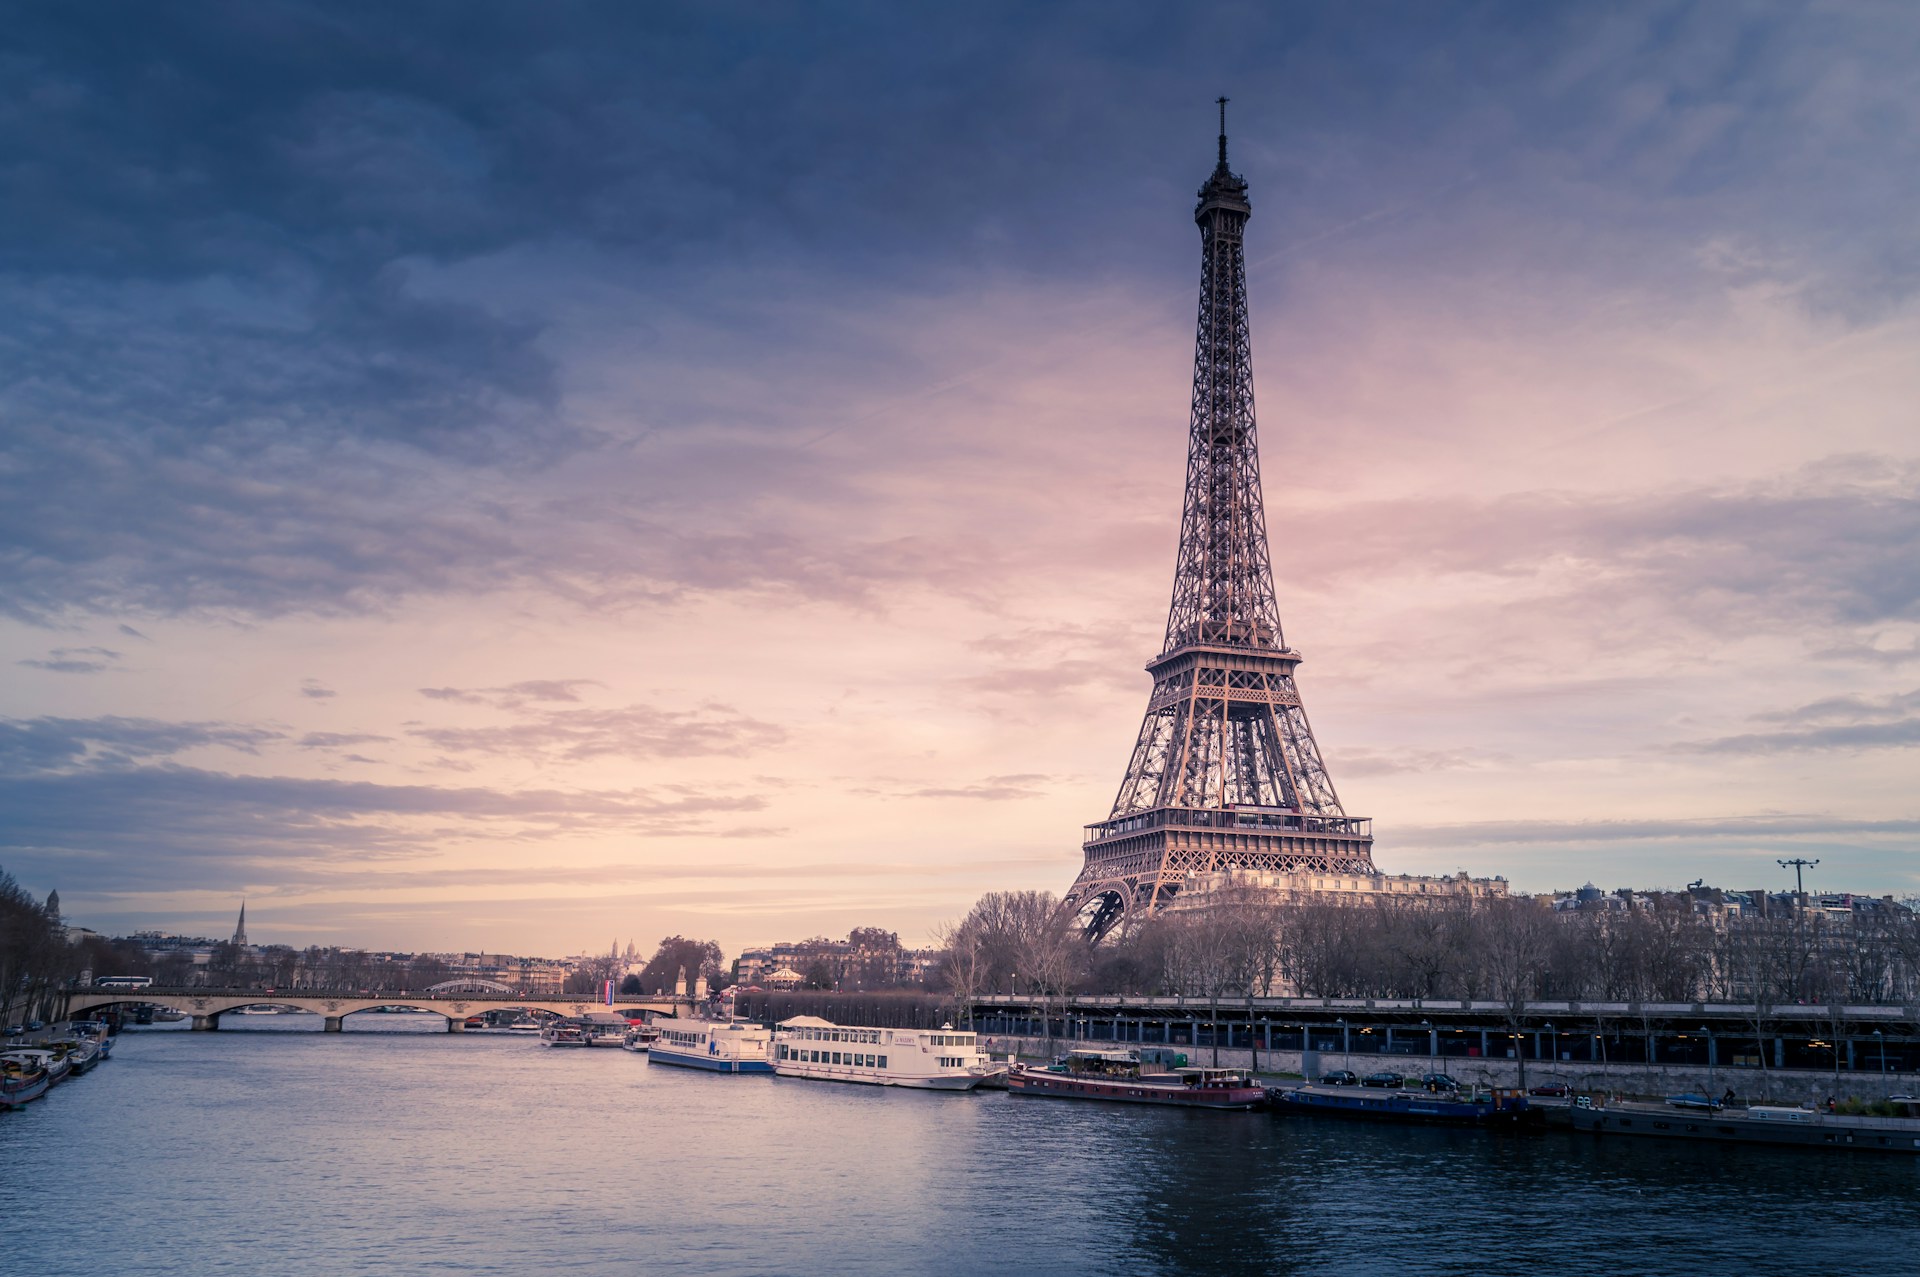 <p>Paris, known as the 'City of Light', is most famous for its landmarks the Eiffel Tower, Louvre Museum, and Notre Dame. People also enjoy it for the high-end fashion, delicate cuisine, and beautiful art displays.</p>